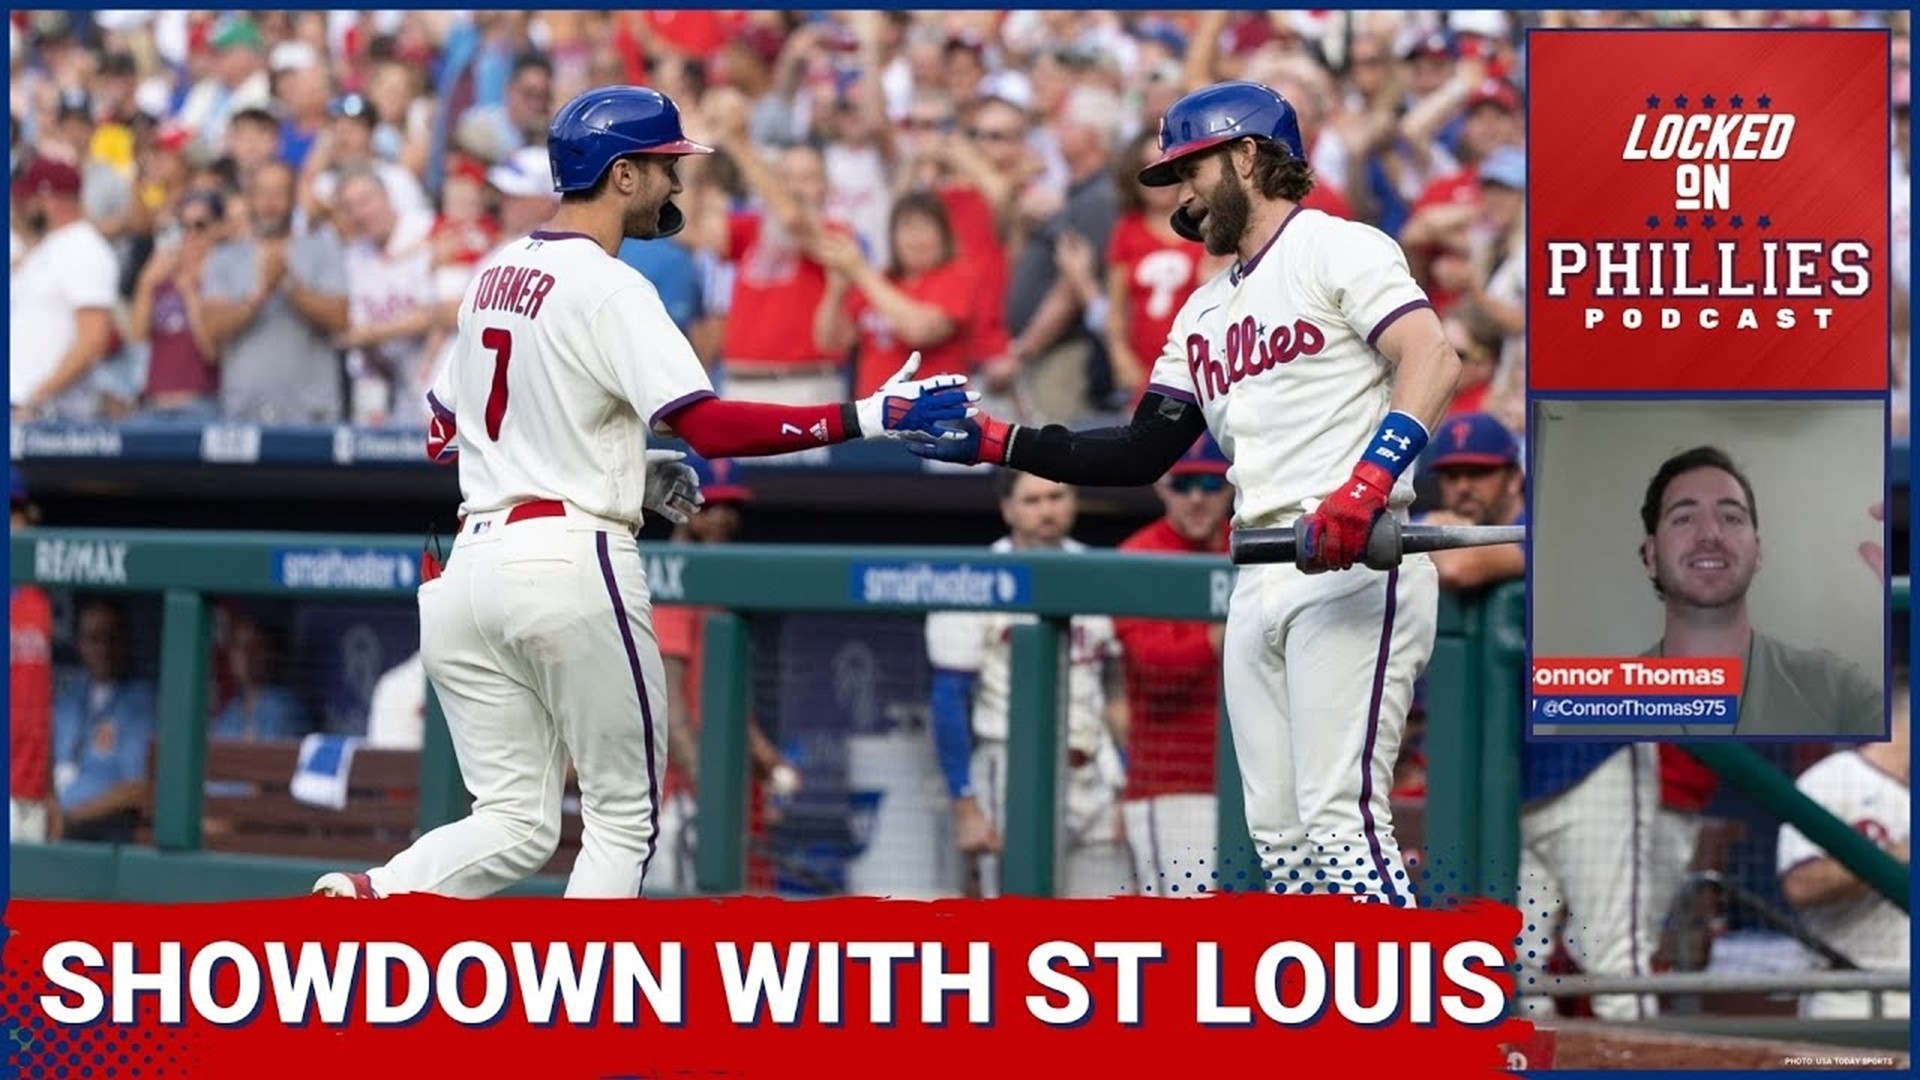 The Philadelphia Phillies Welcome The St. Louis Cardinals For A